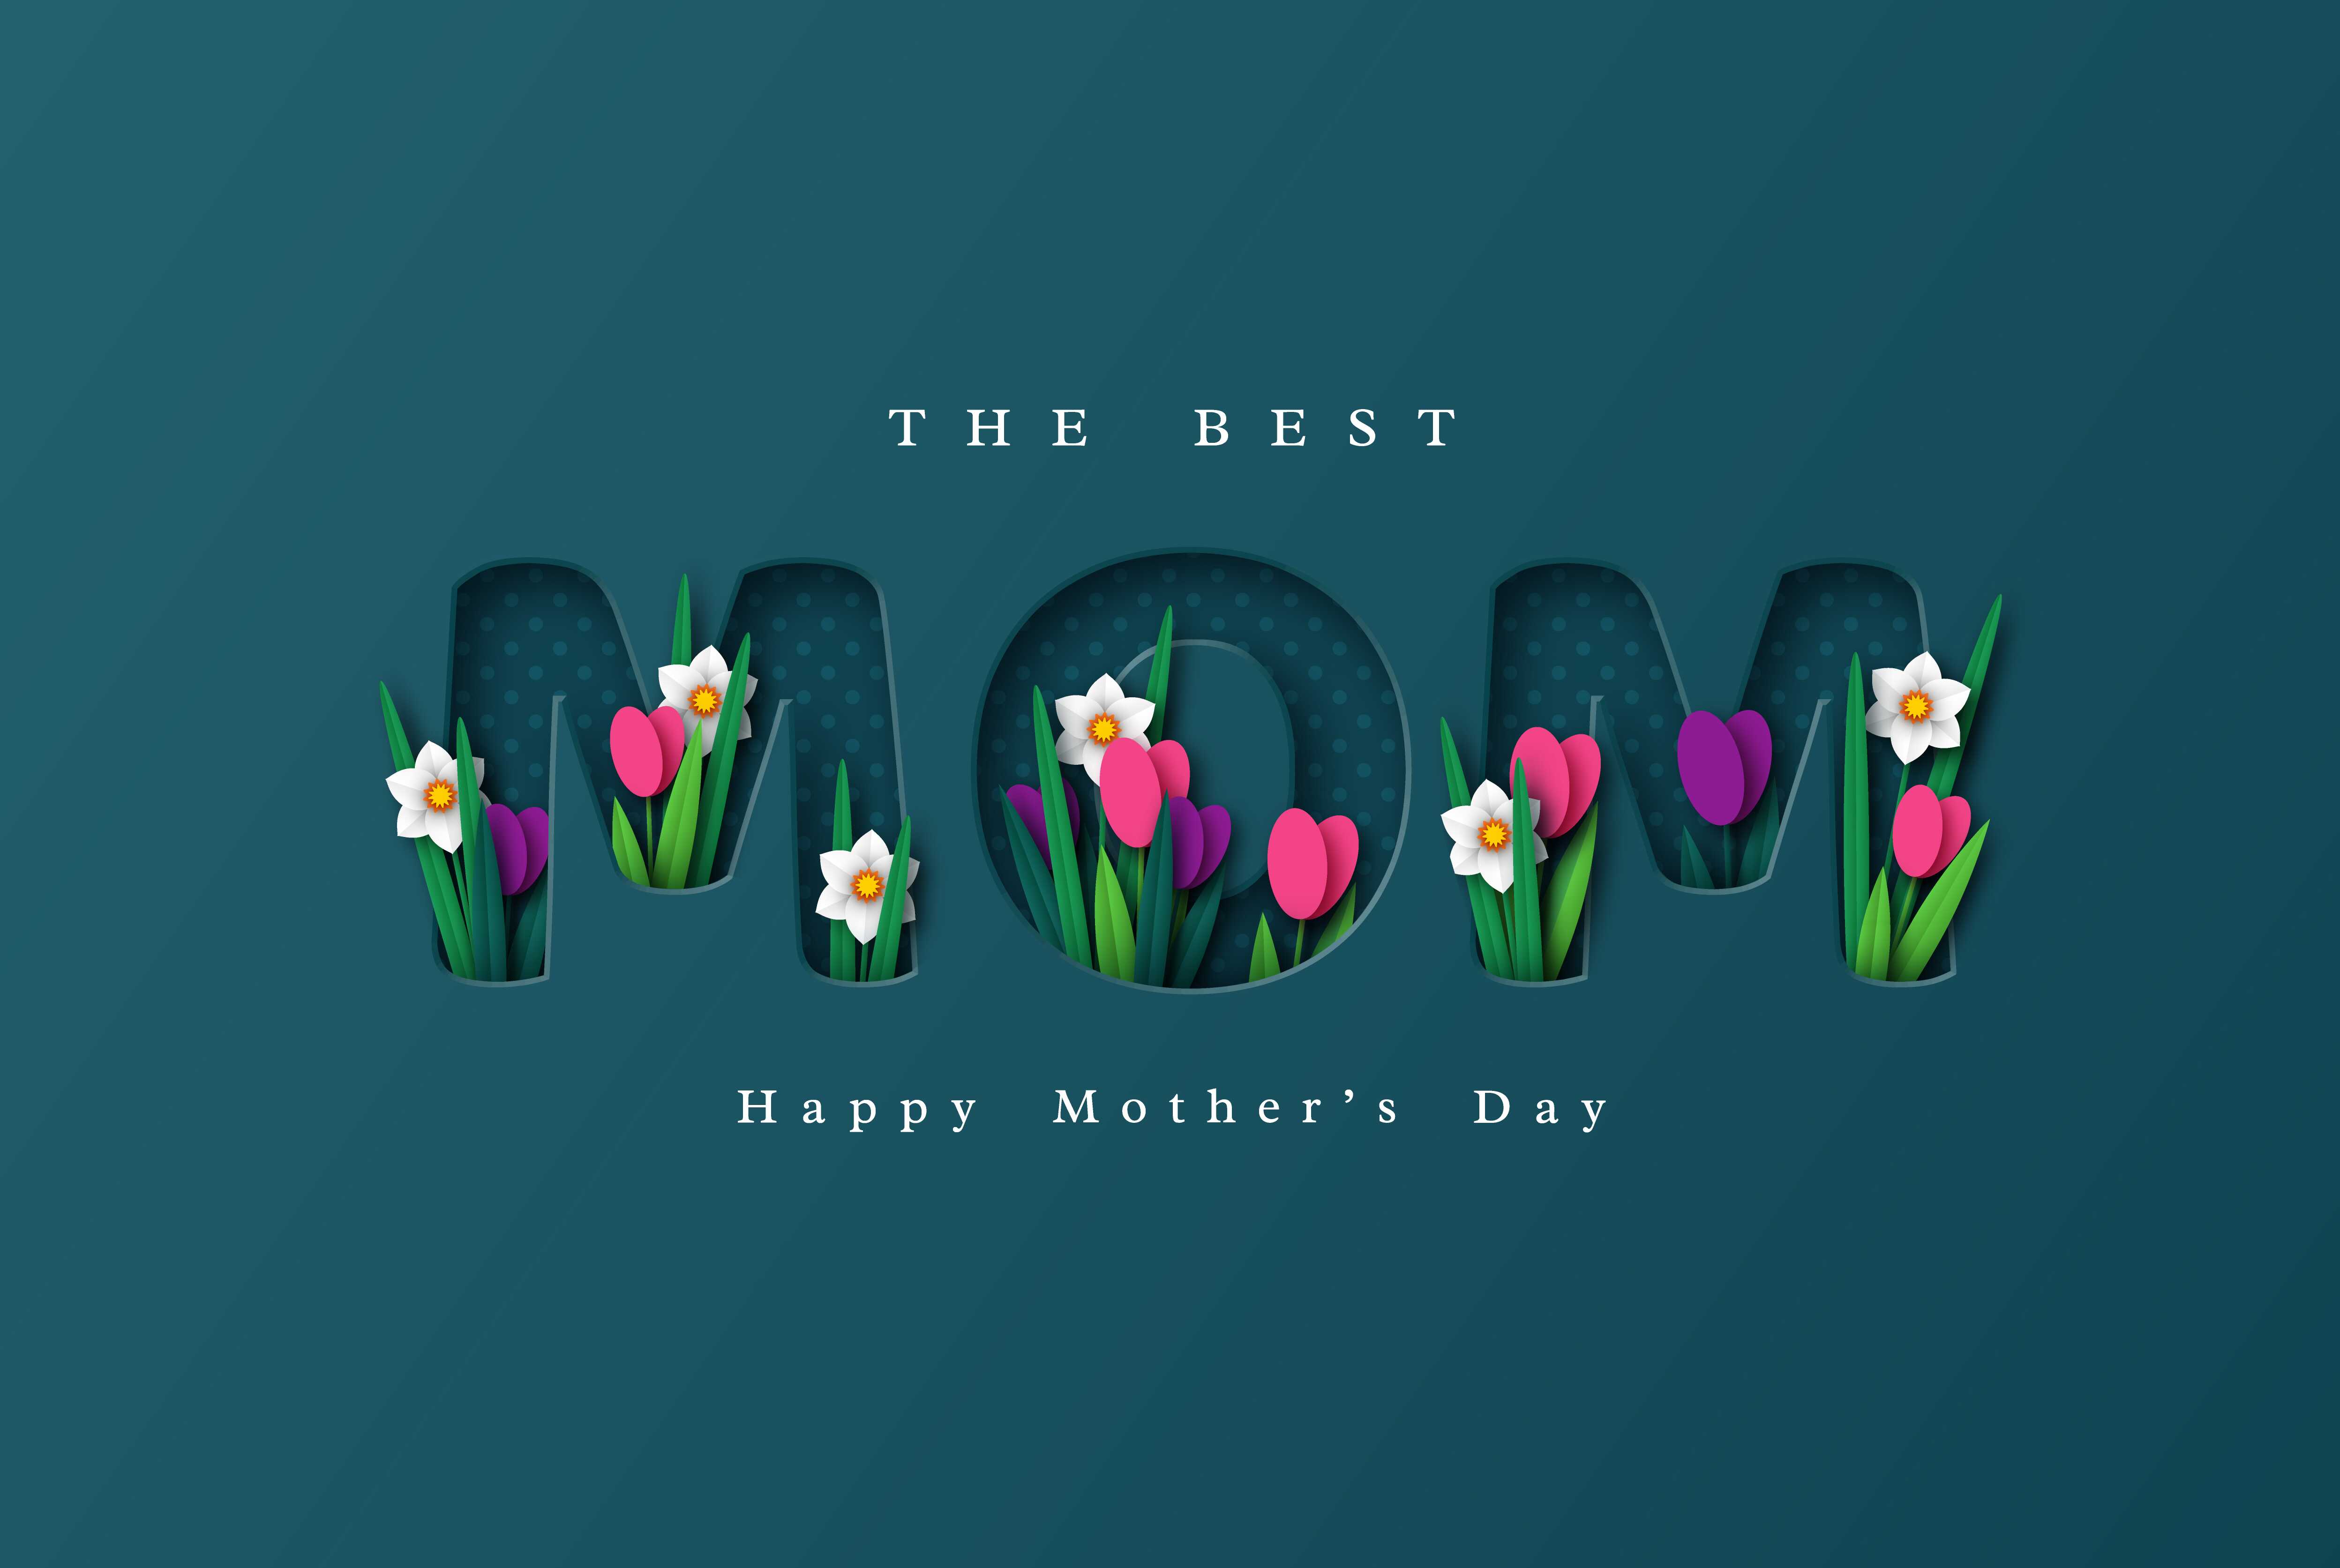 23 Happy Mother's Day Zoom Backgrounds - Free Download - The Bash